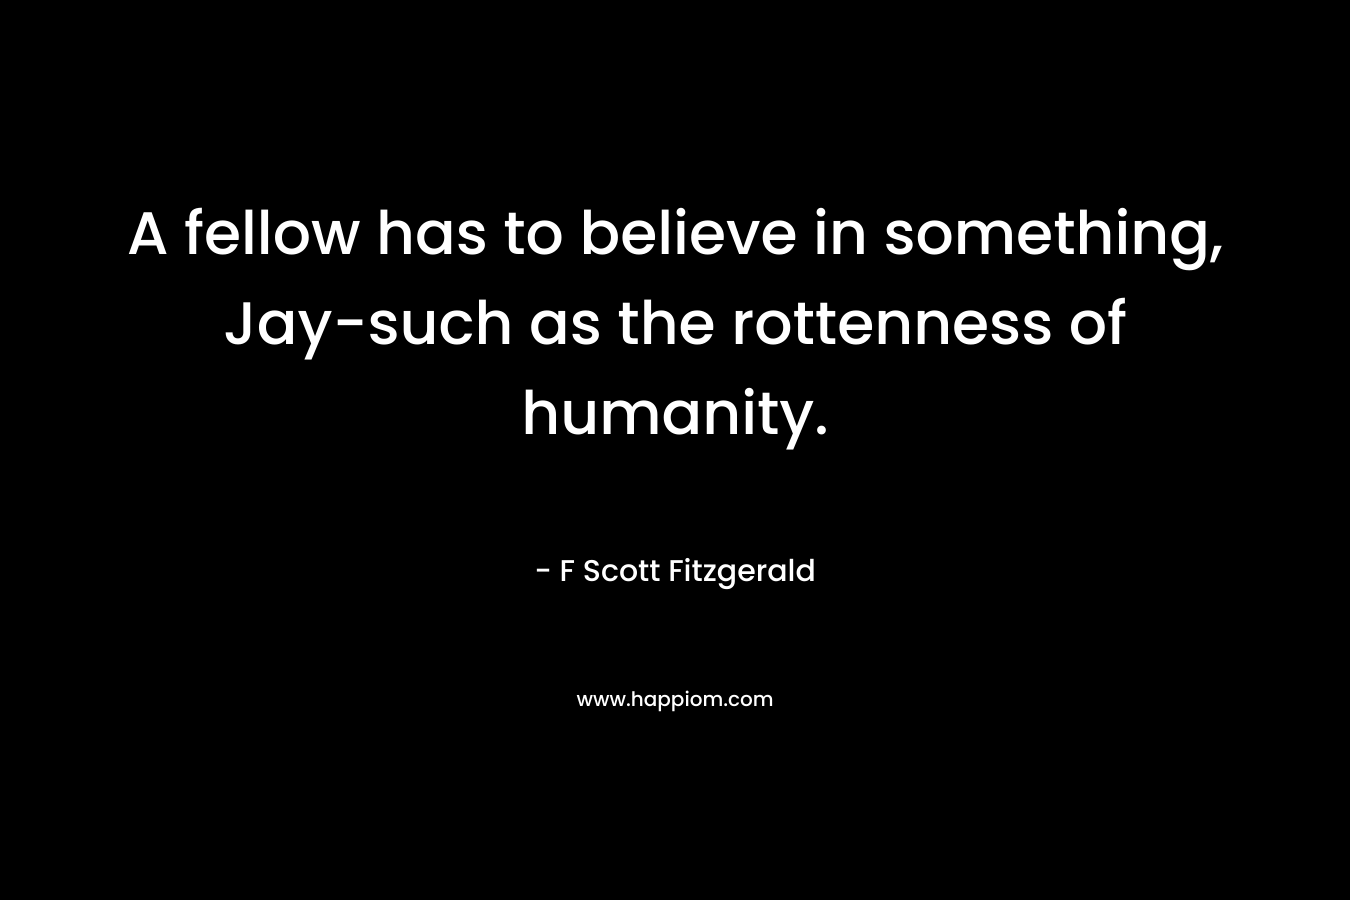 A fellow has to believe in something, Jay-such as the rottenness of humanity.